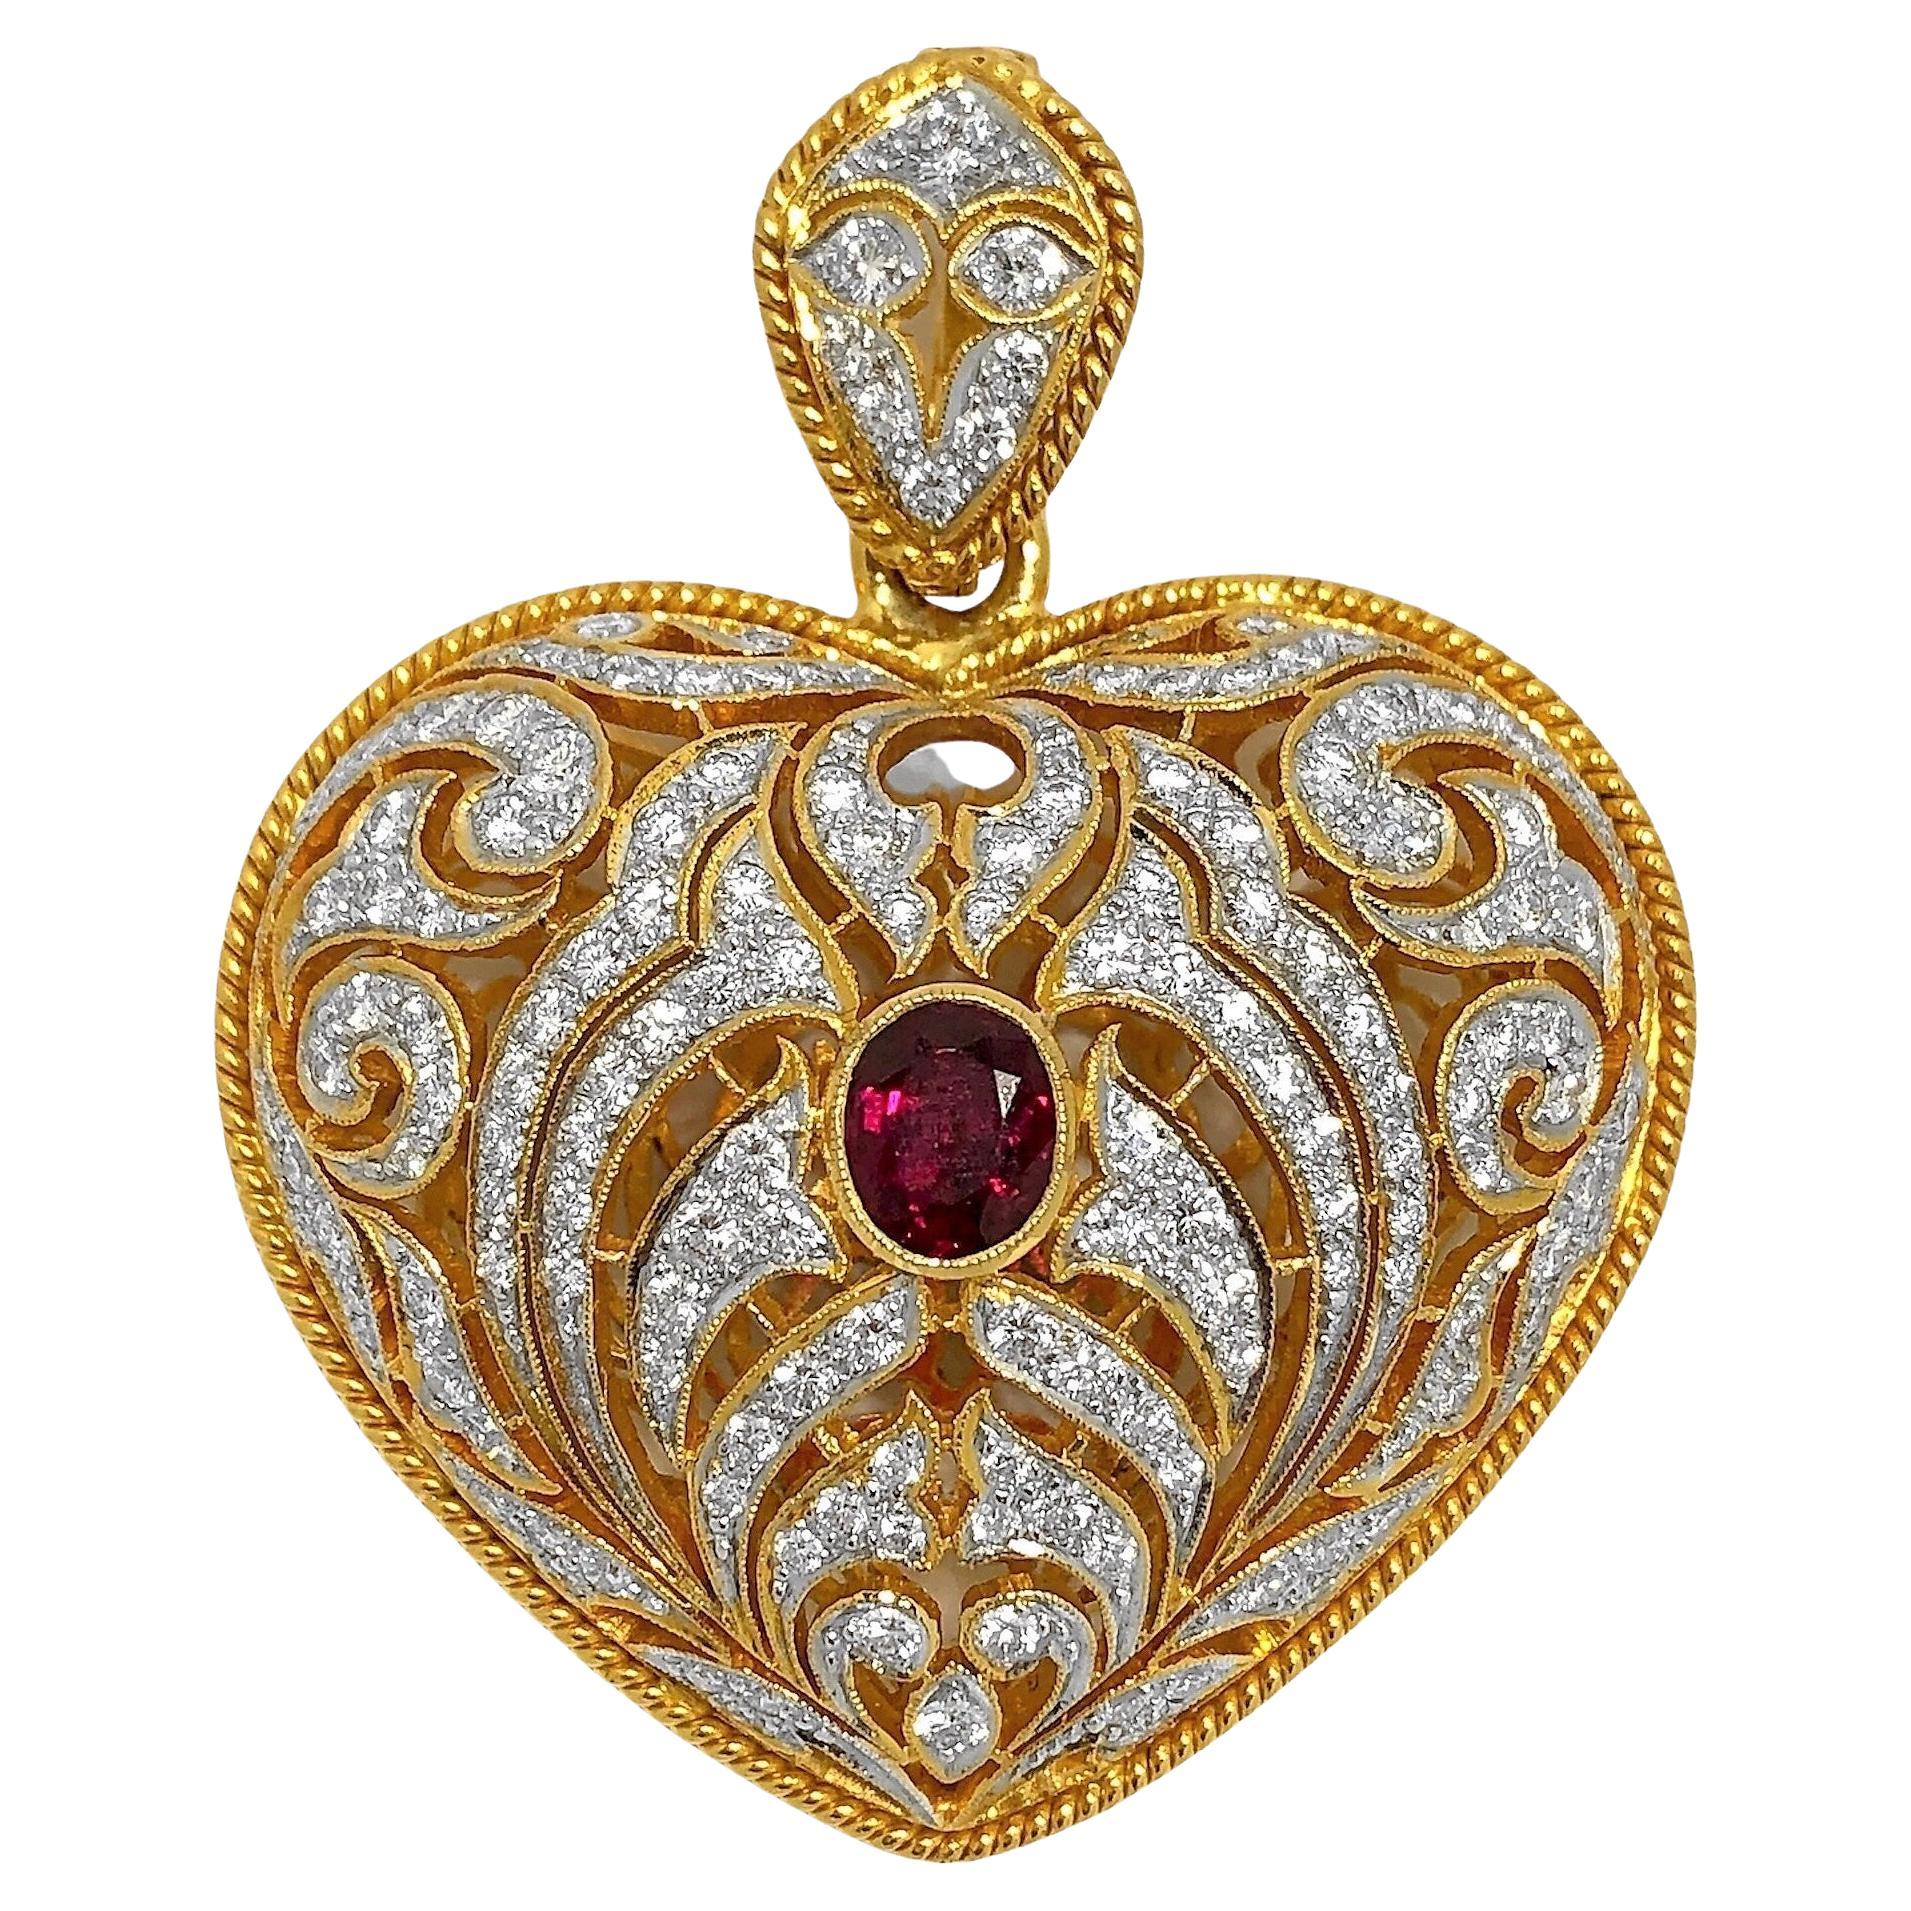 Large Gold Hand Pierced Diamond Encrusted Puffed Heart Pendant with Ruby Center